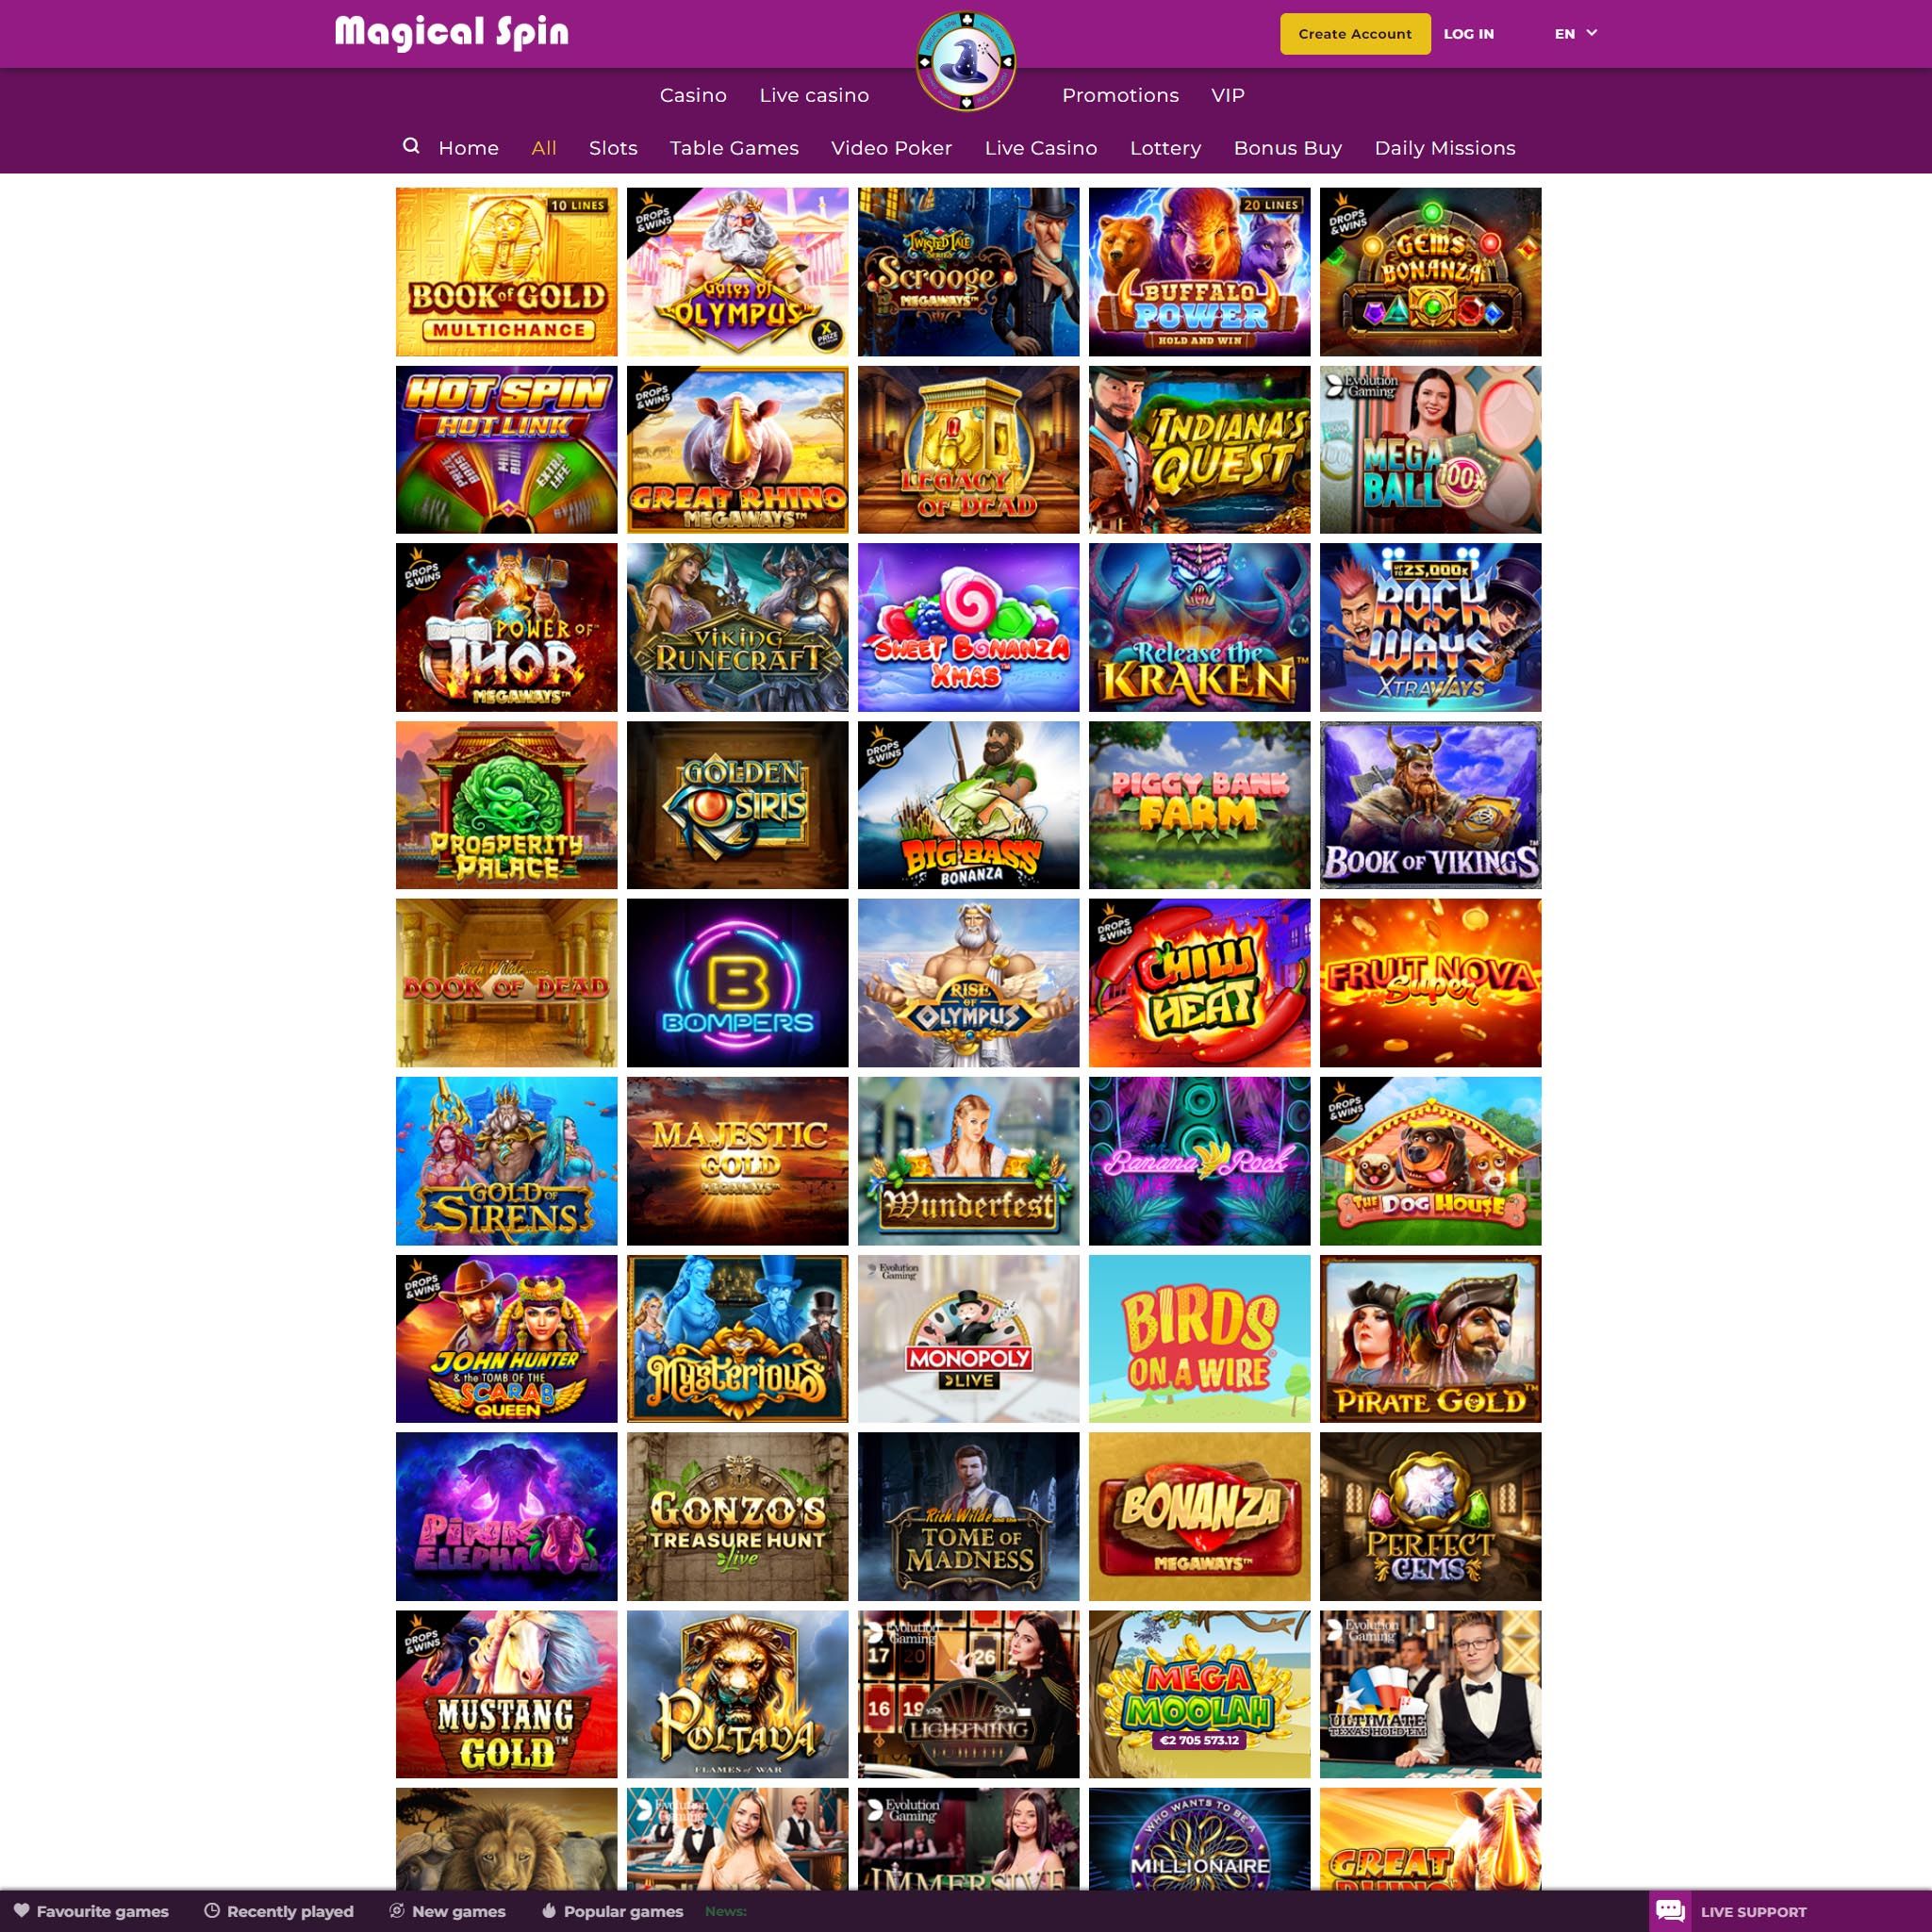 Magical Spin Casino full games catalogue